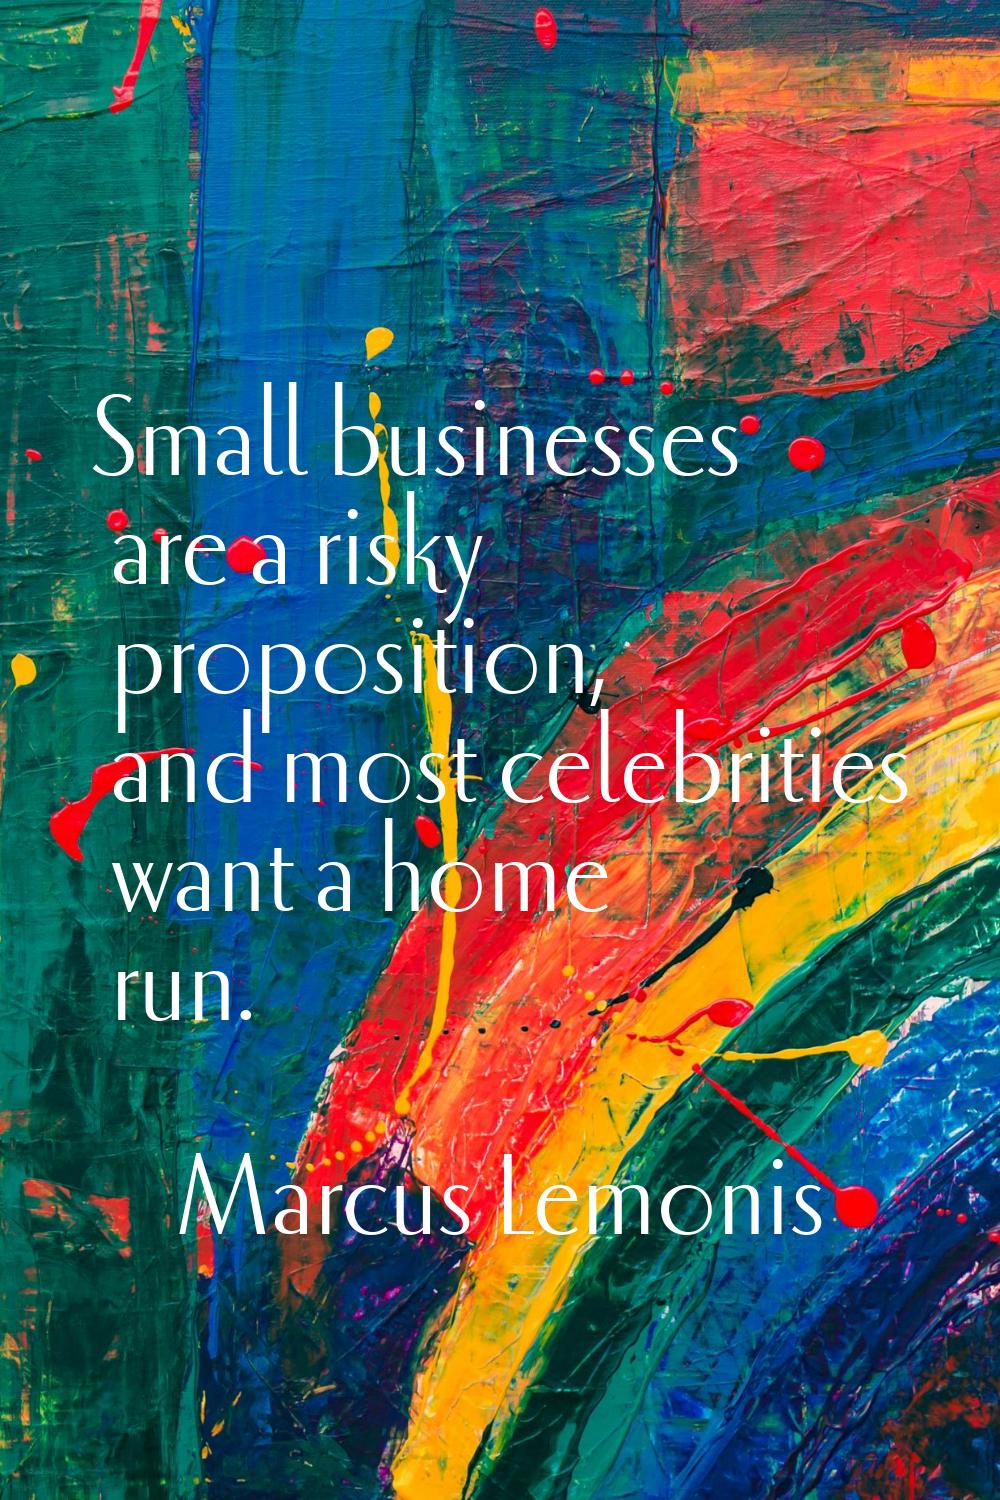 Small businesses are a risky proposition, and most celebrities want a home run.